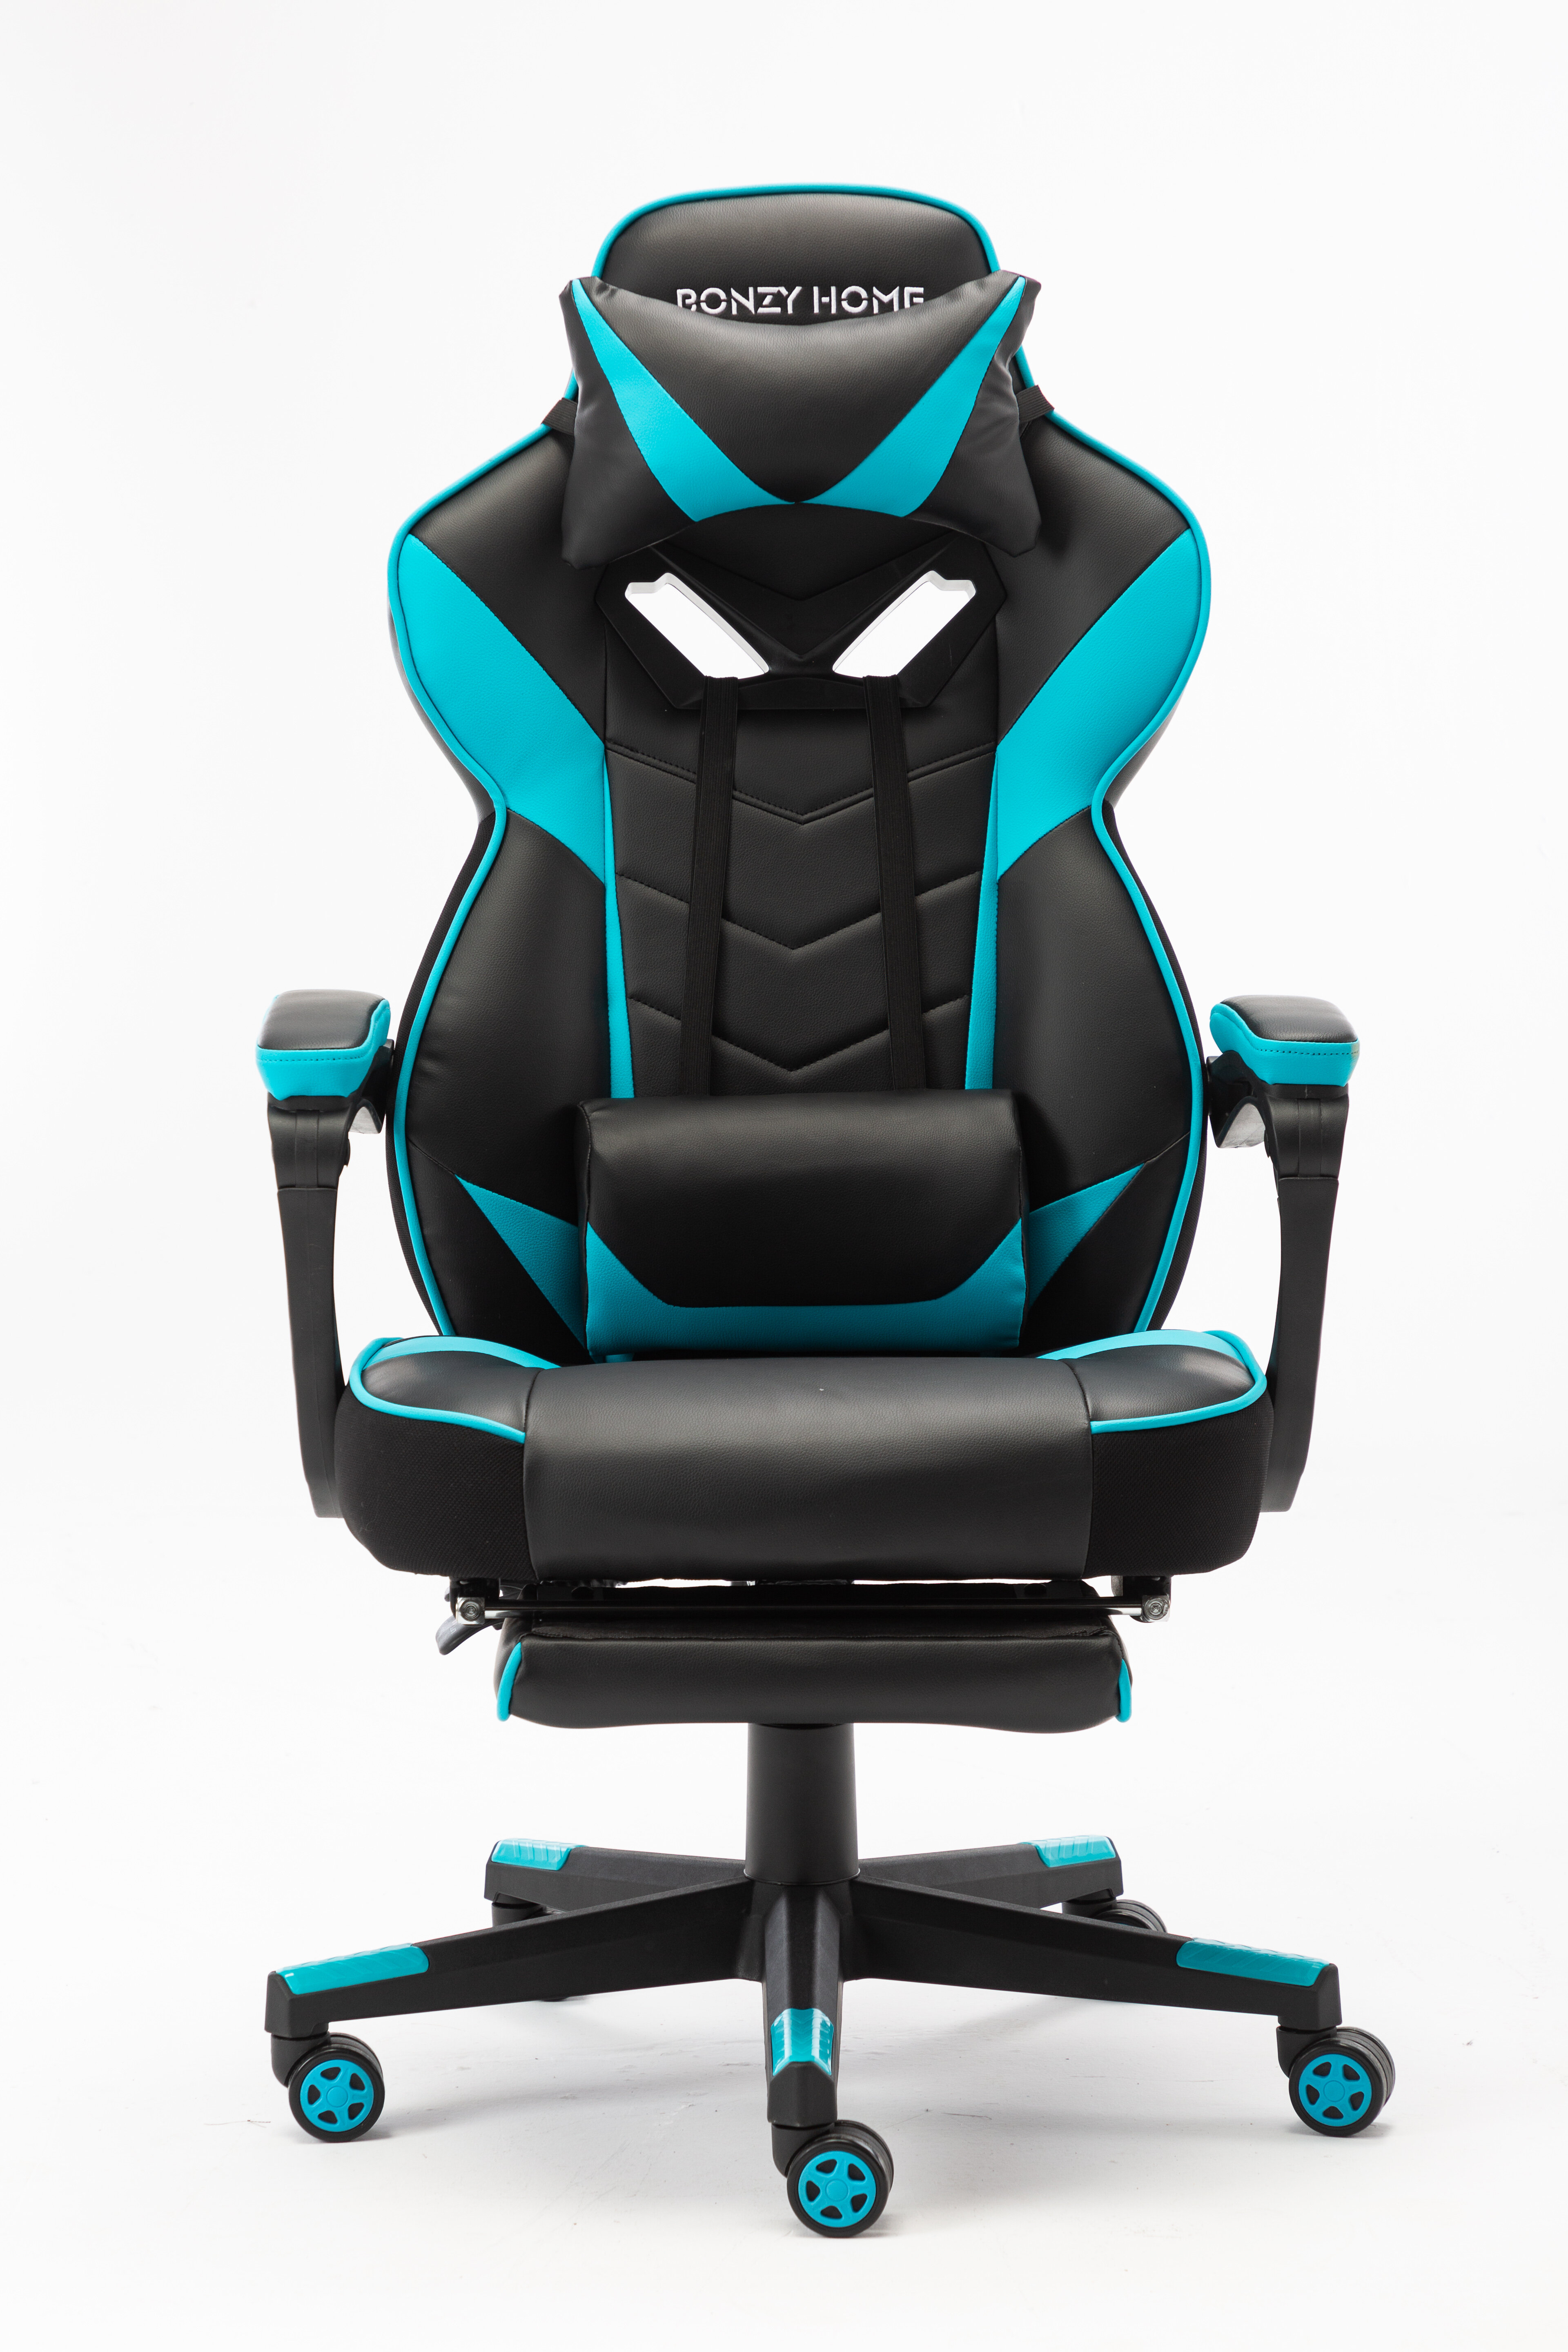 Buysexe Gaming Chair Computer Office Chair Ergonomic Desk Chair With Footrest Racing Executive Swivel Chair Wayfair